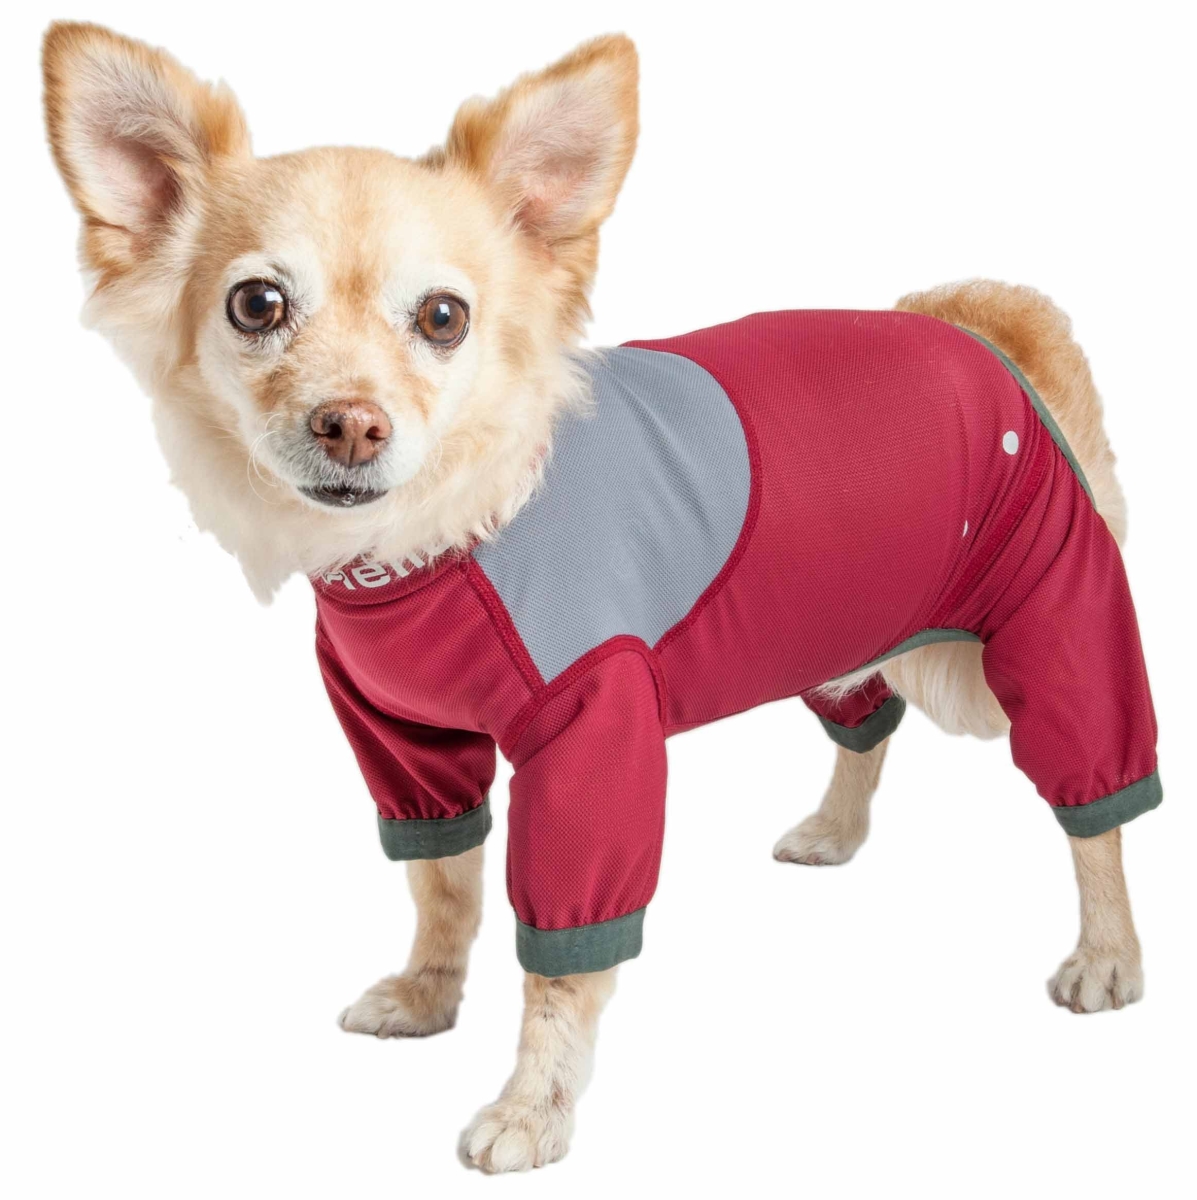 Yghl9rdsm Tail Runner 4-way-stretch Breathable Full Bodied Performance Dog Track Suit - Red & Grey, Small